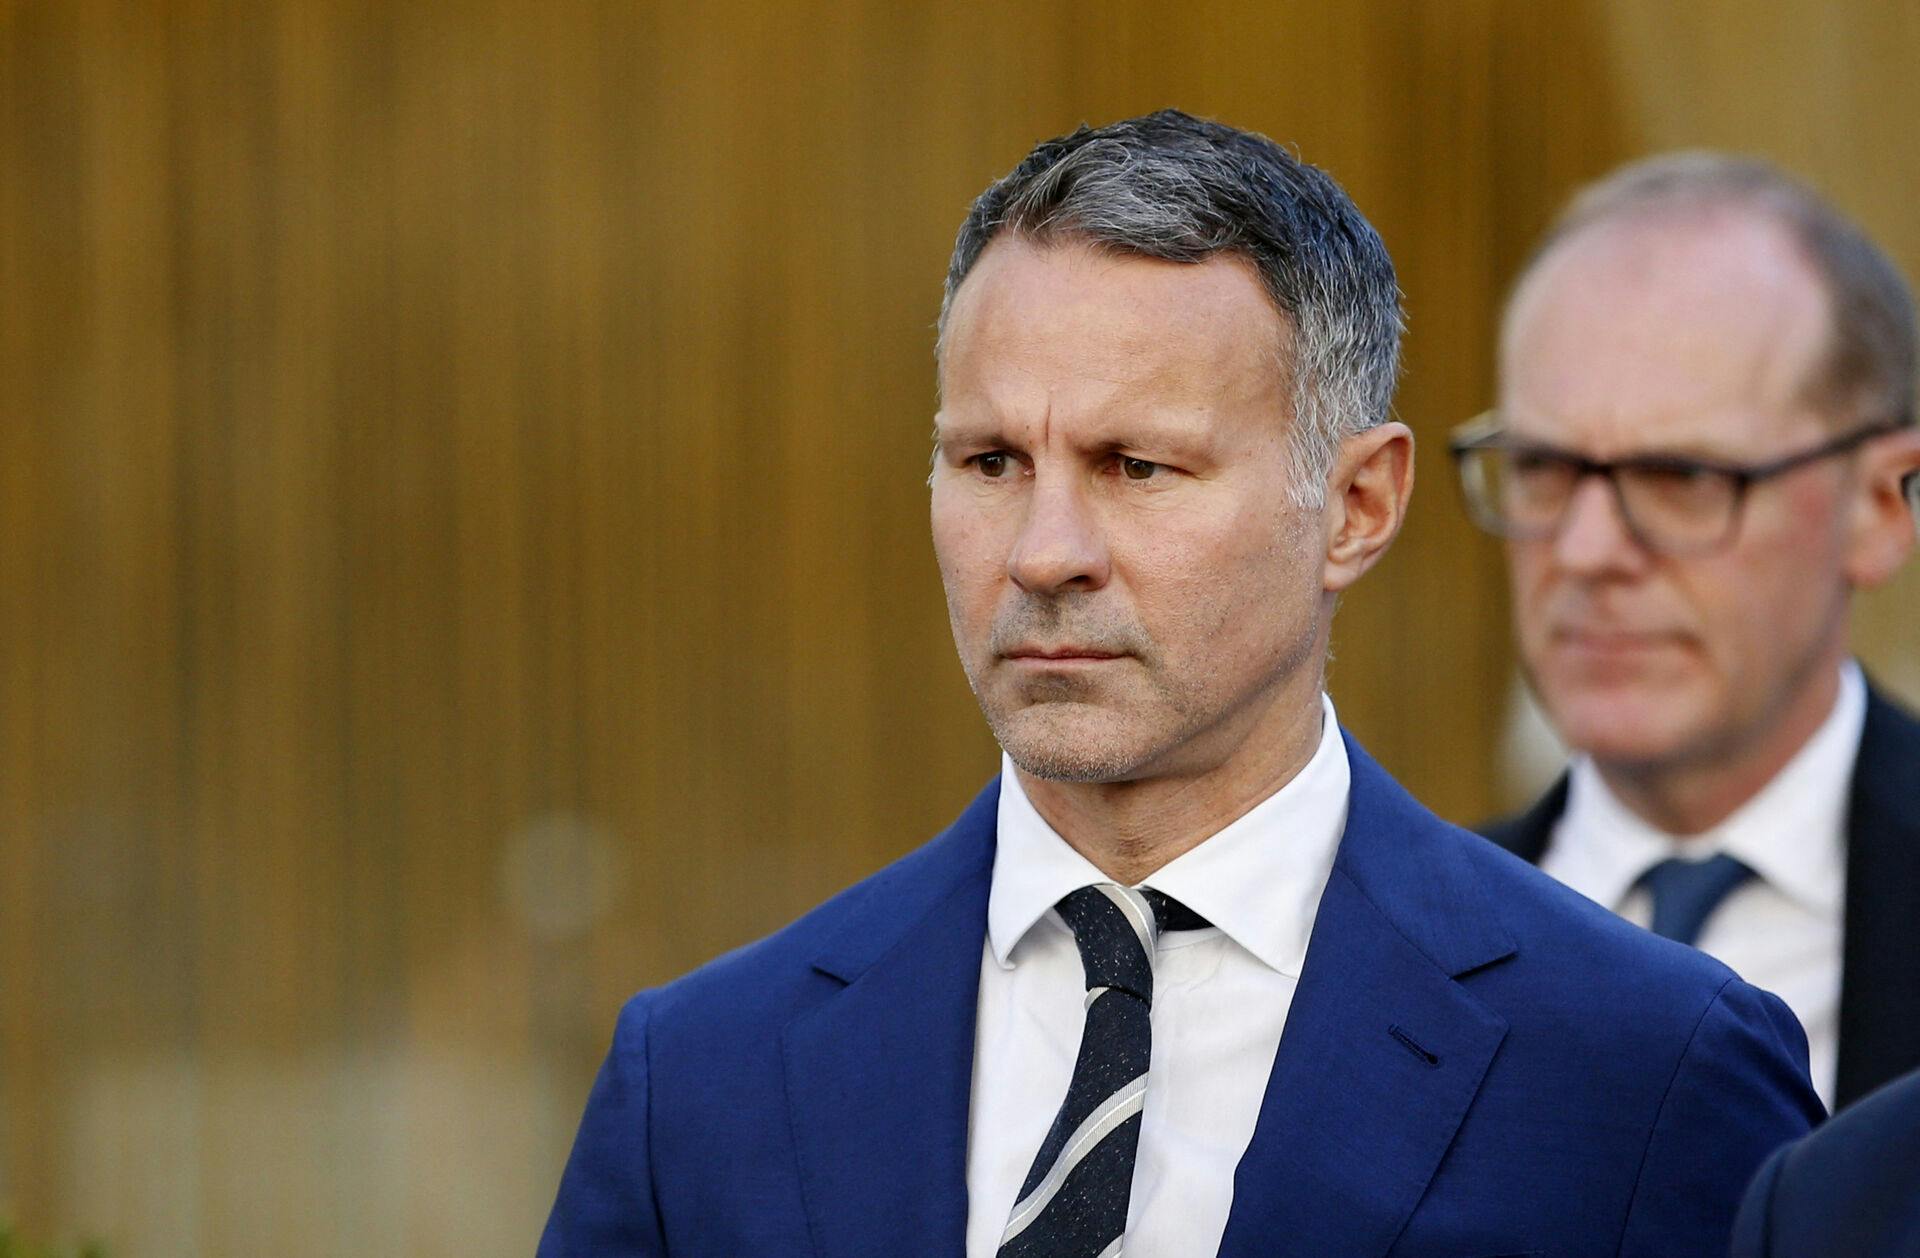 Former Manchester United footballer Ryan Giggs arrives at Manchester Crown Court in Manchester, Britain, August 31, 2022 REUTERS/Ed Sykes